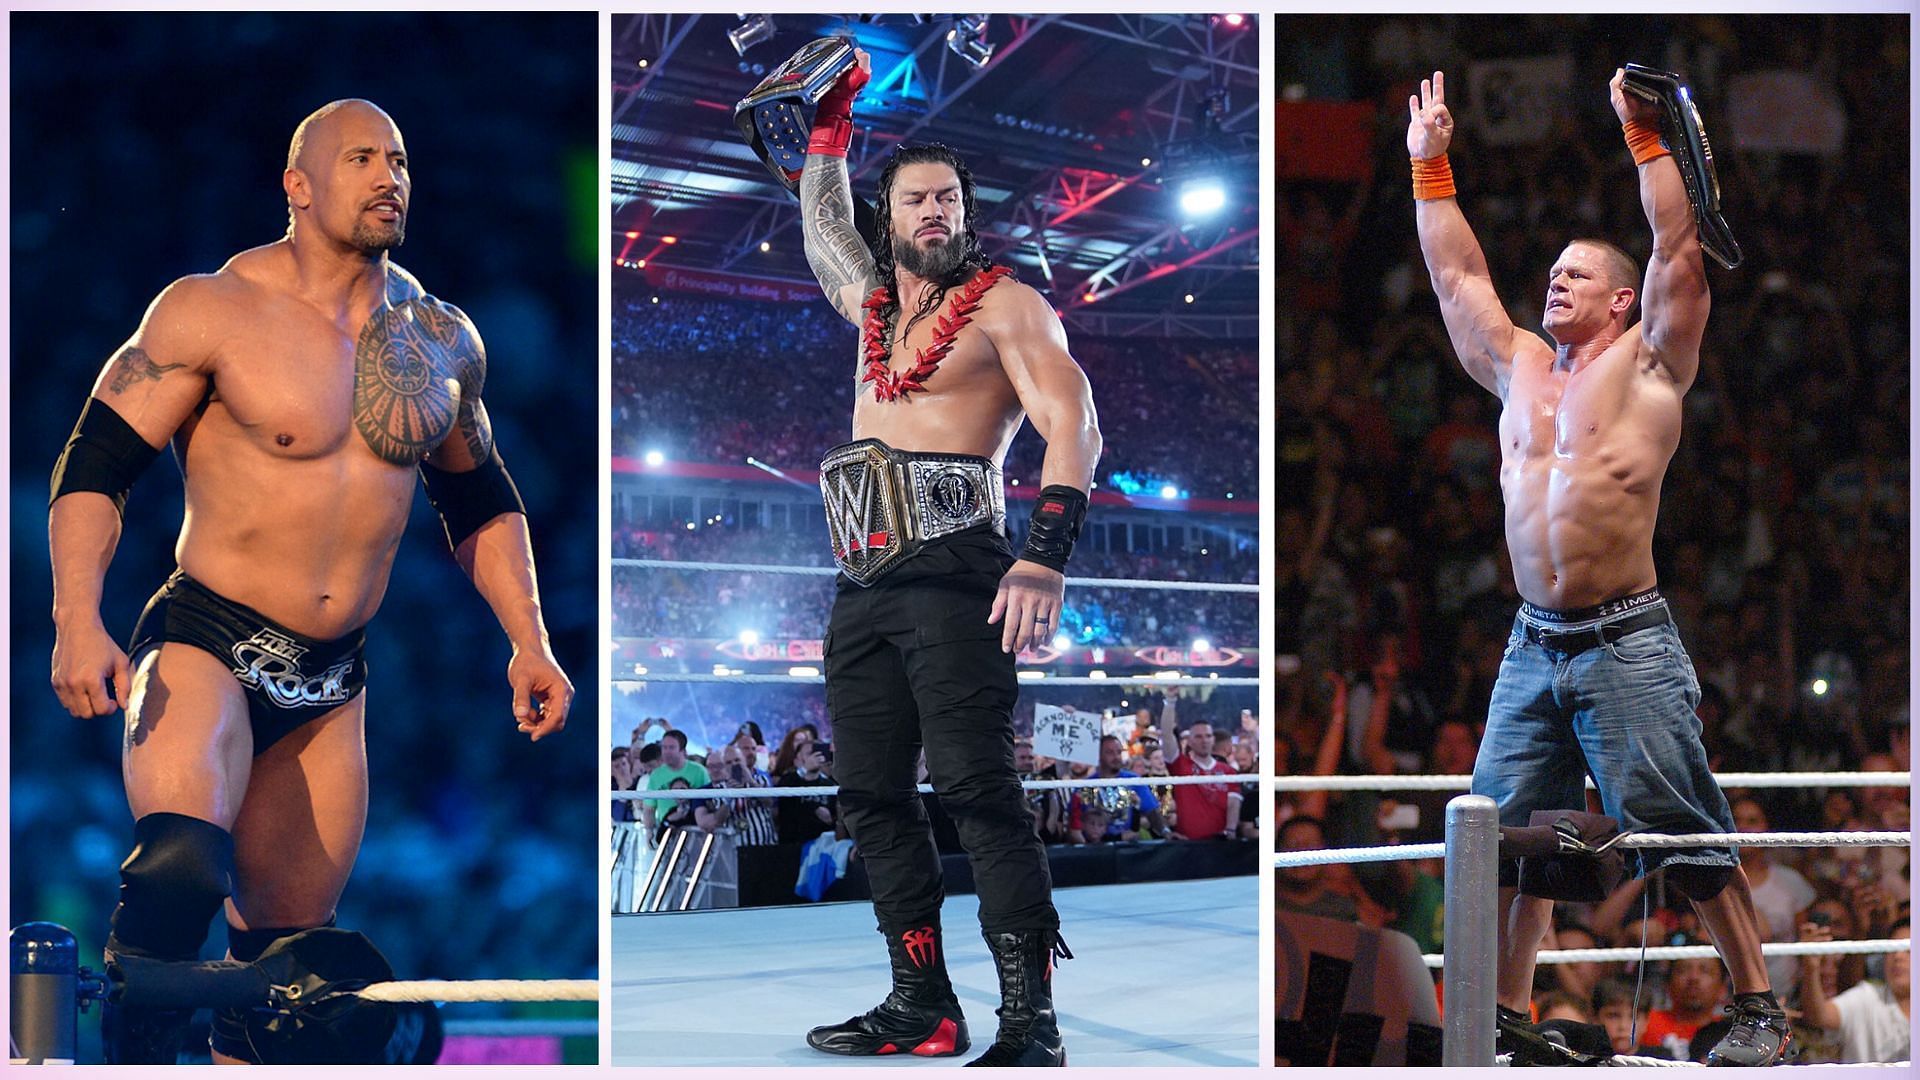 The Rock may not fight Roman Reigns at WWE WrestleMania